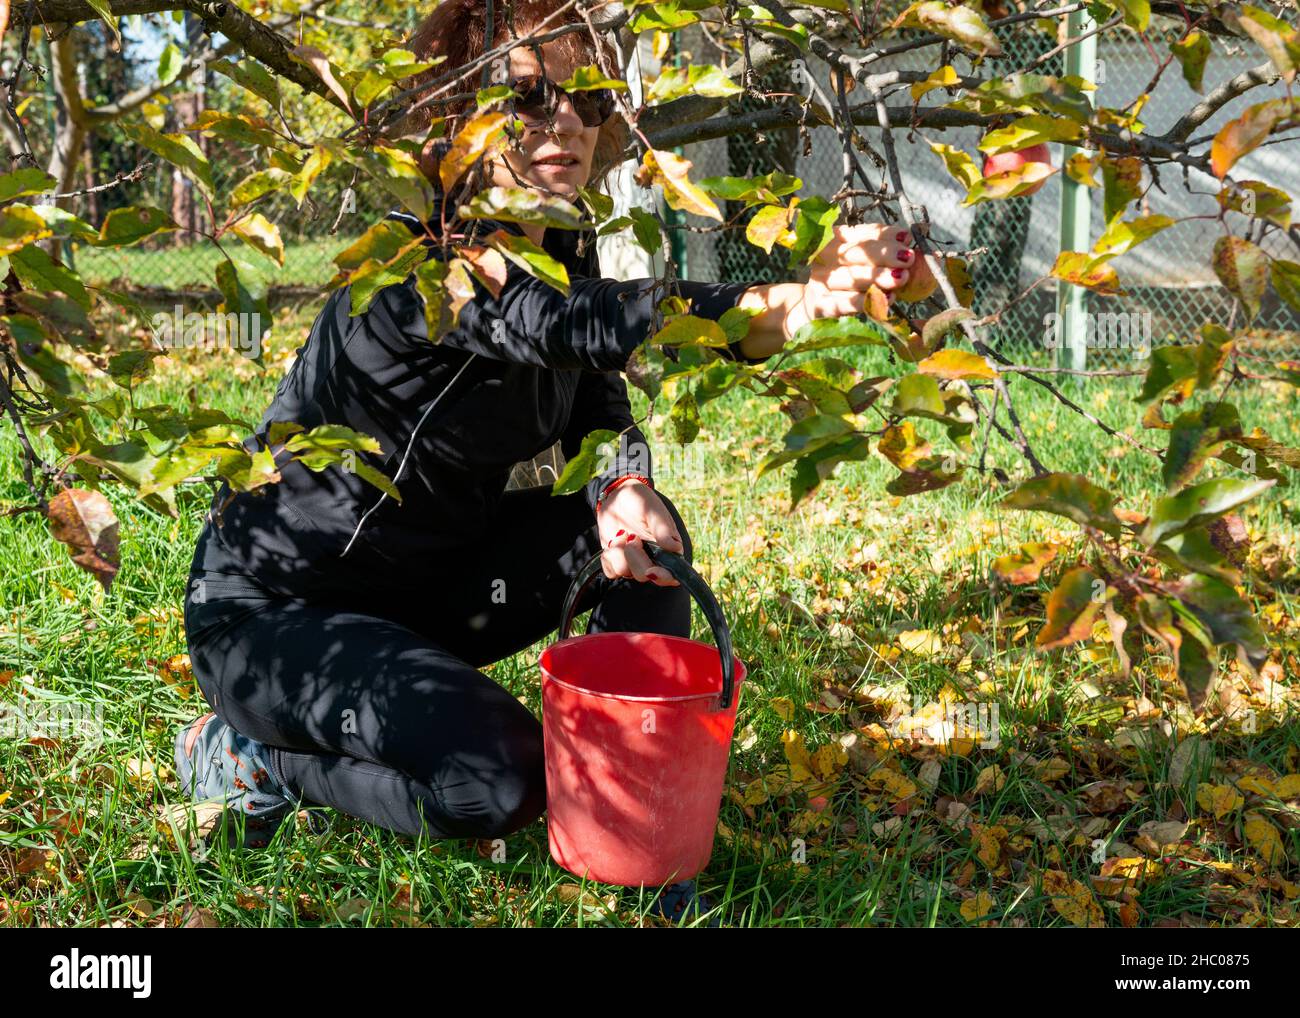 Woman hand picking organic apples in orchard. Stock Photo